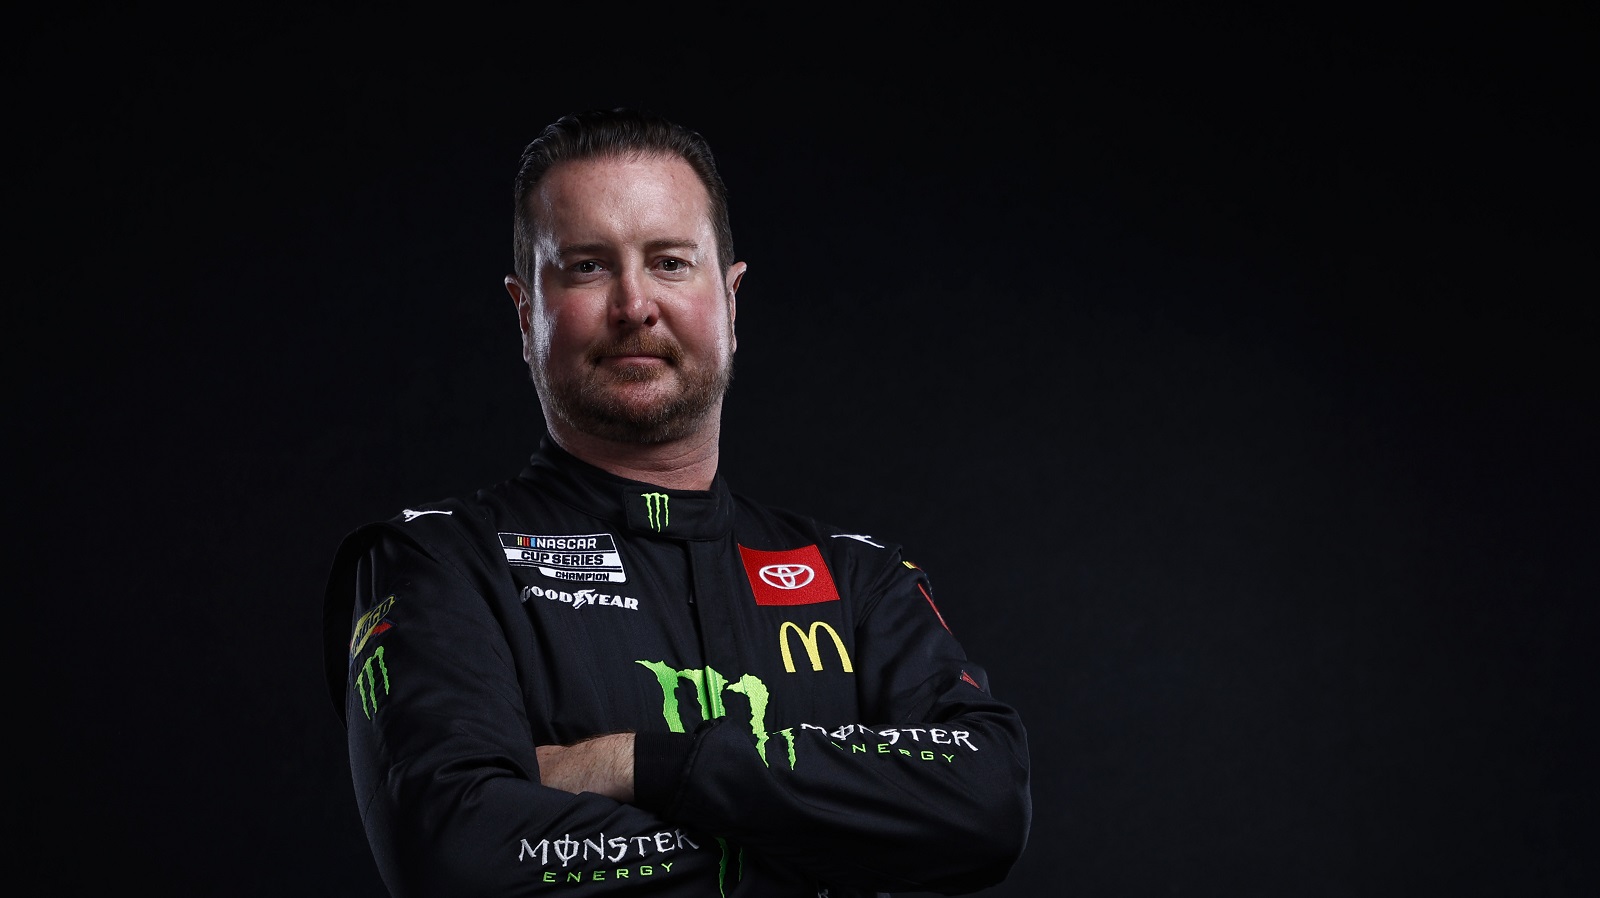 NASCAR driver Kurt Busch poses for a photo during NASCAR Production Days at Clutch Studios on Jan. 19, 2022, in Concord, North Carolina. | Jared C. Tilton/Getty Images